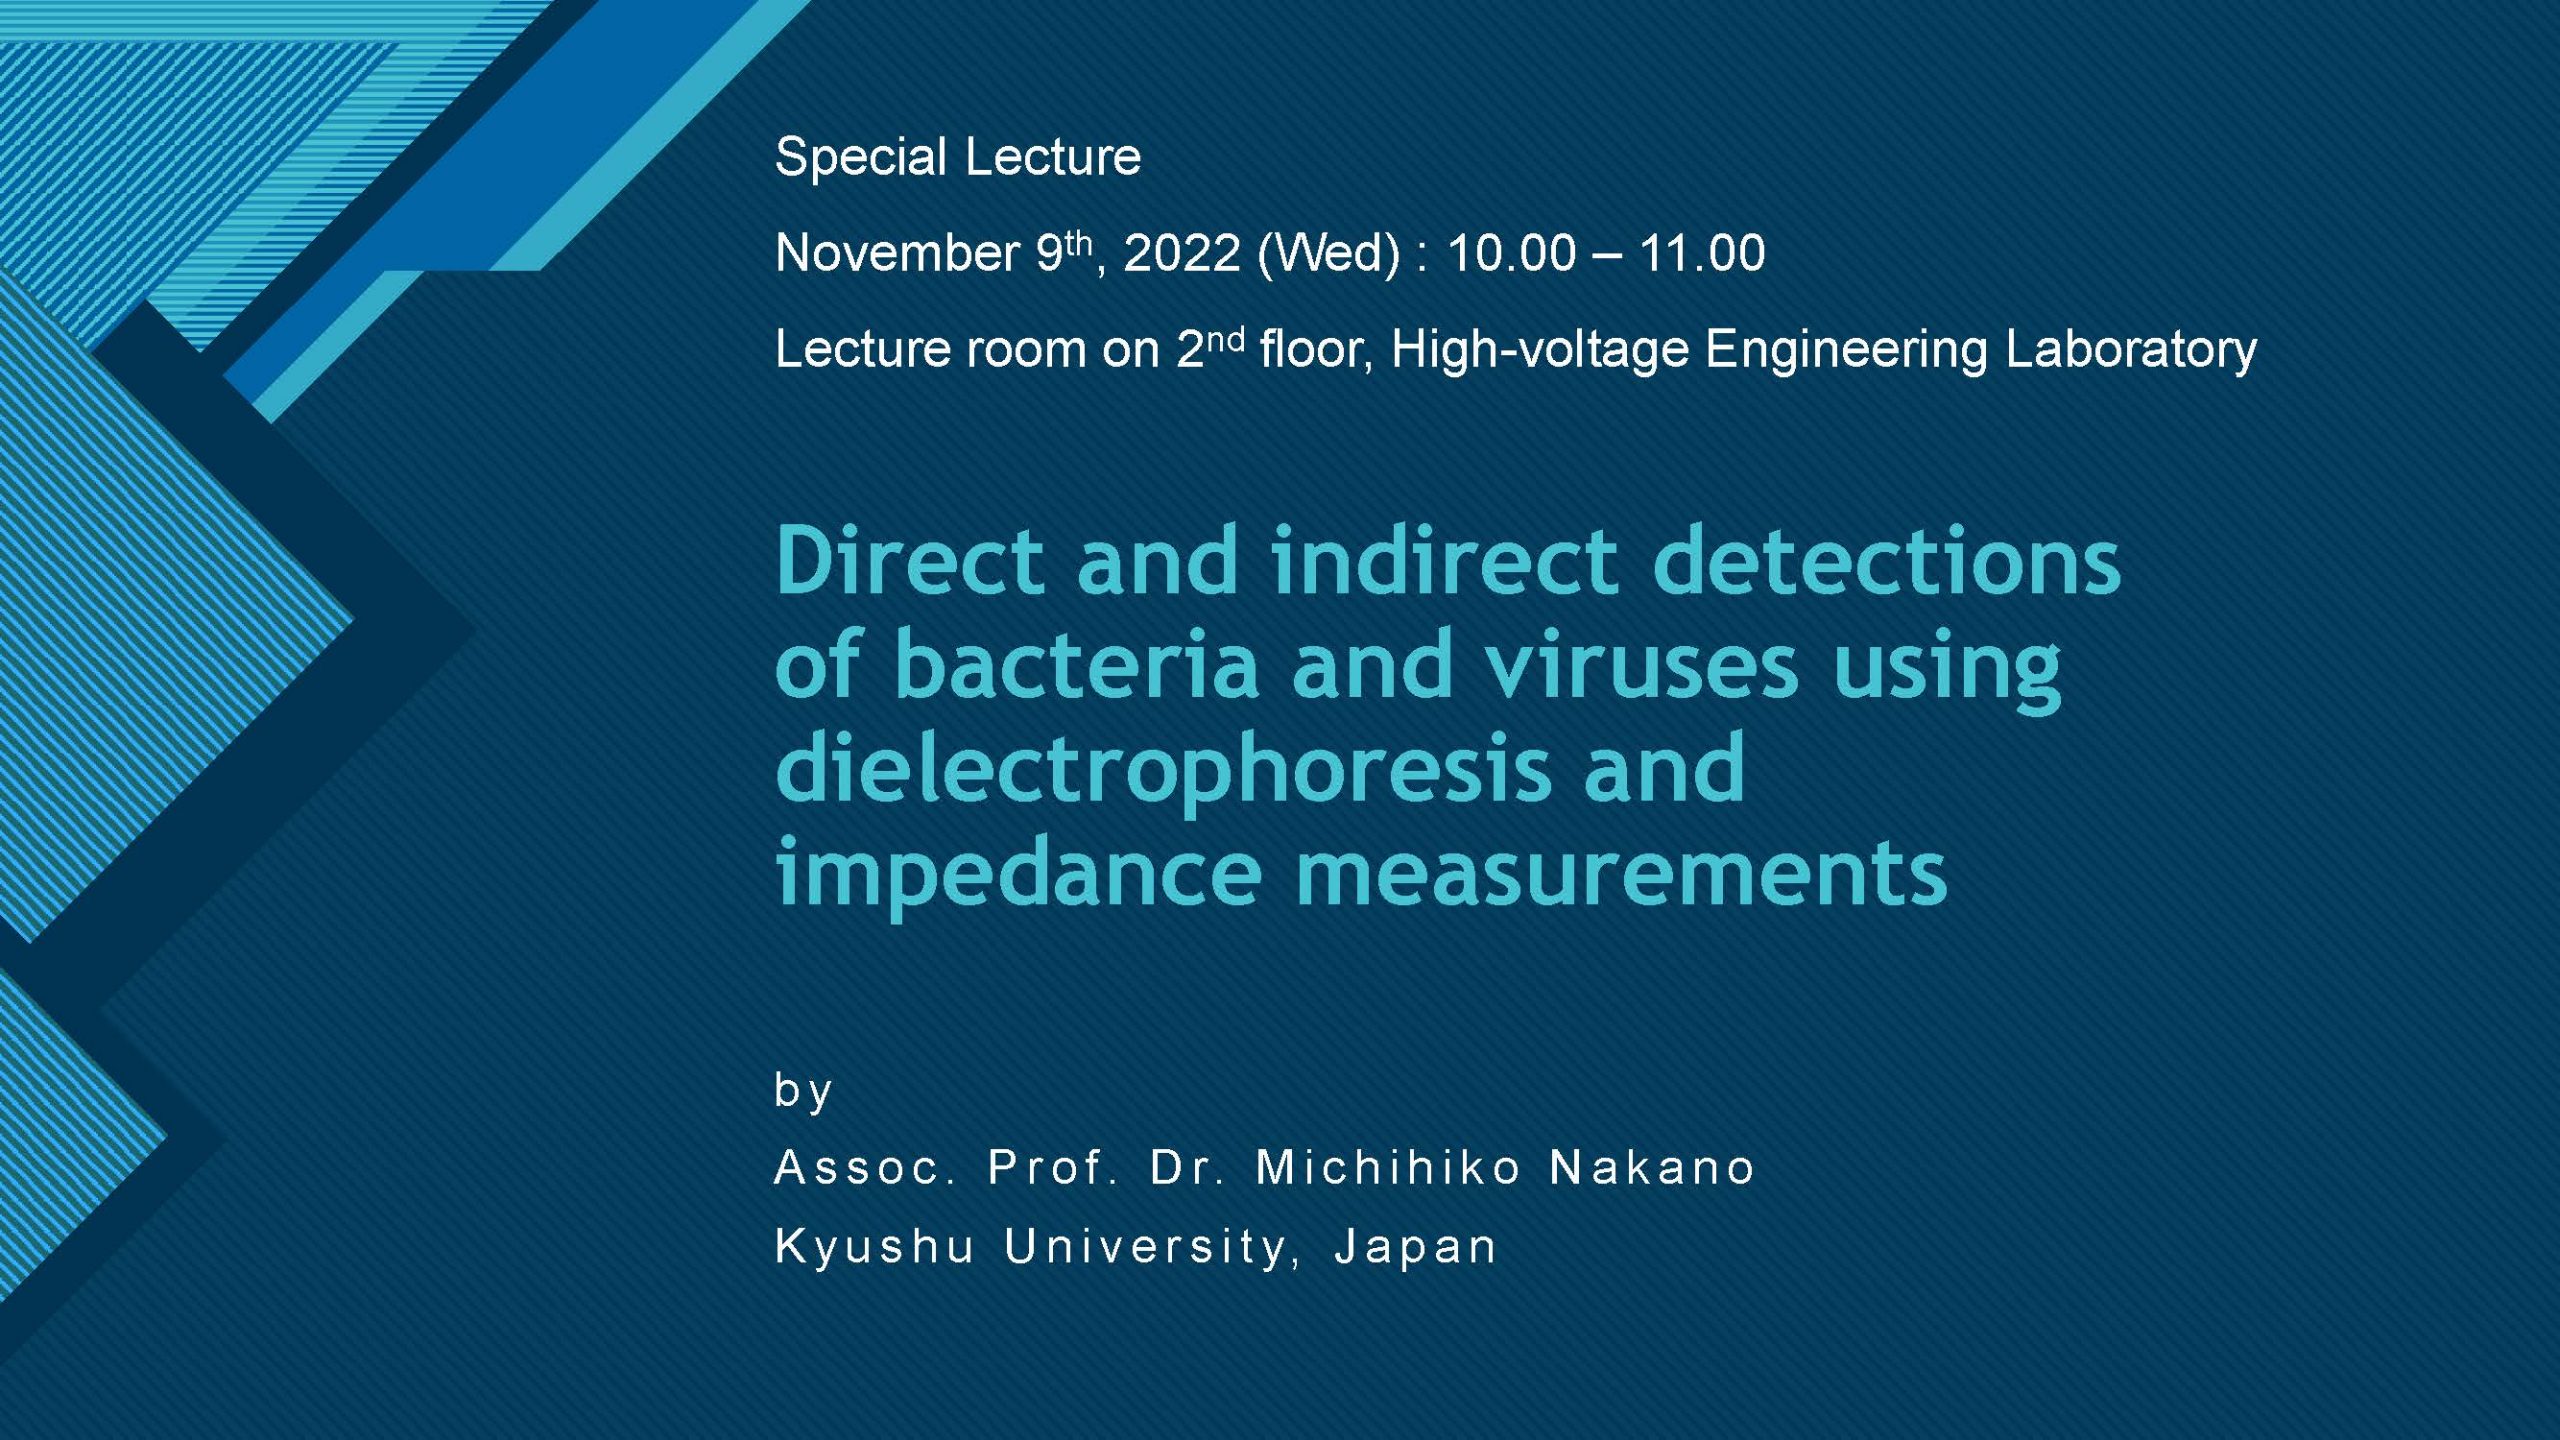 Special Lecture "Direct and indirect detections of bacteria and viruses using dielectrophoresis and impedance measurements"